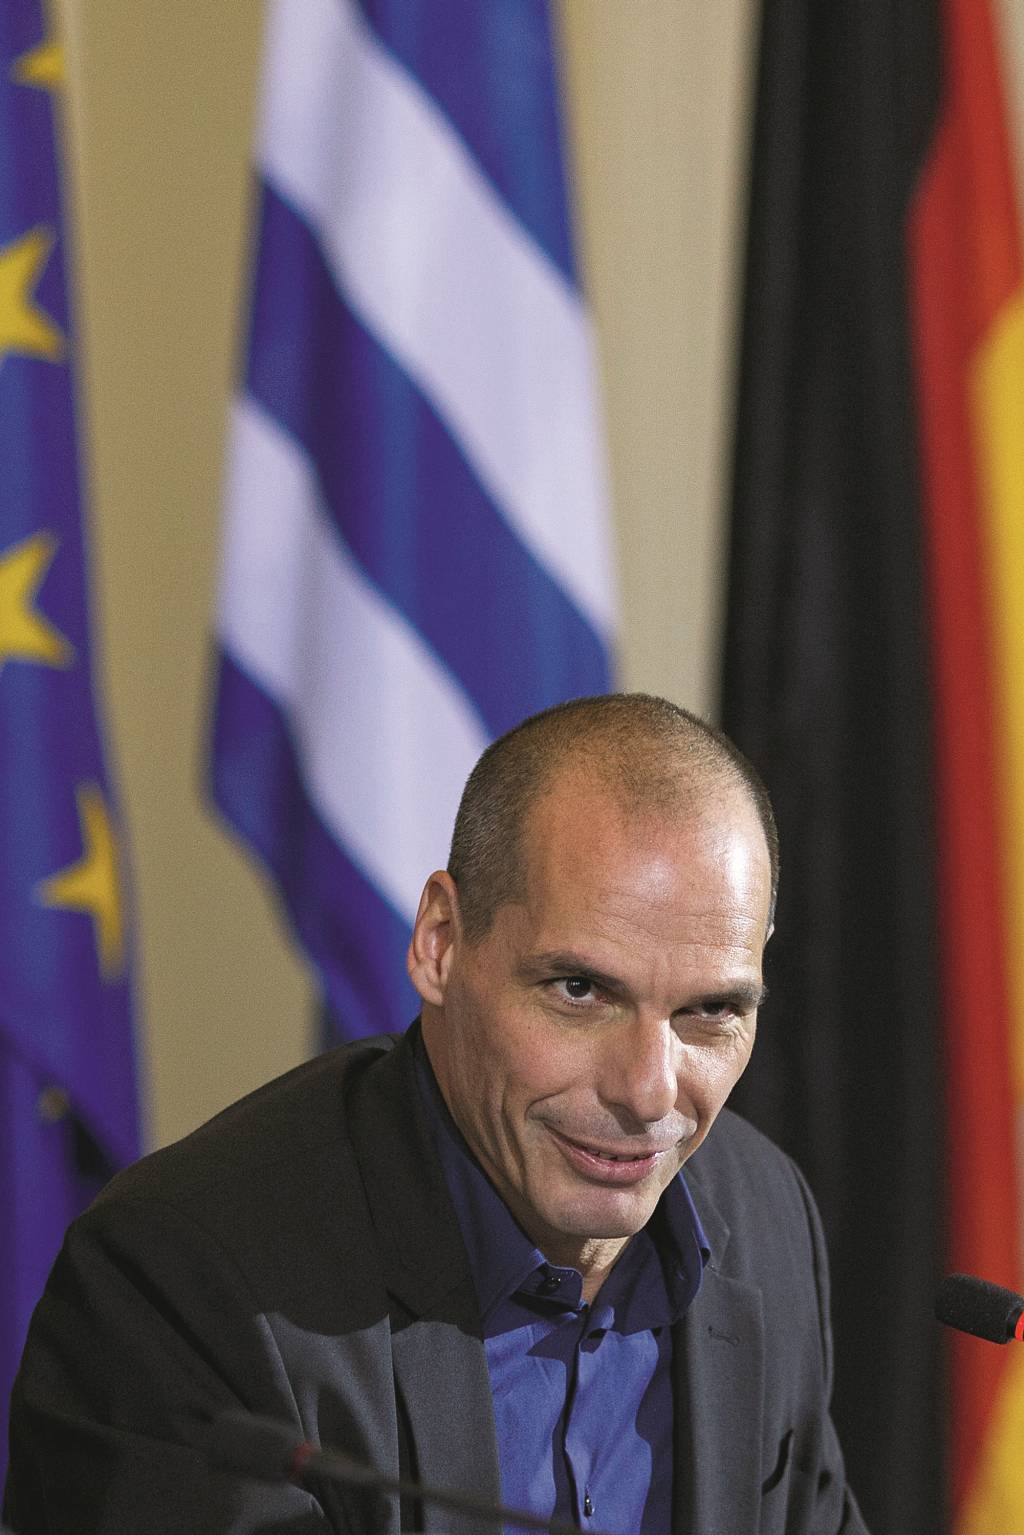 BERLIN, GERMANY - FEBRUARY 05:  New Greek Finance Minister Yanis Varoufakis attends a press conference with German Finance Minister Wolfgang Schaeuble following talks on February 5, 2015 in Berlin, Germany. Varoufakis is touring several European cities and yesterday met with Mario Draghi at the European Central Bank following announcements by the new Greek government to sharply alter its relationship with the troika of loan-giving entities.  (Photo by Carsten Koall/Getty Images)